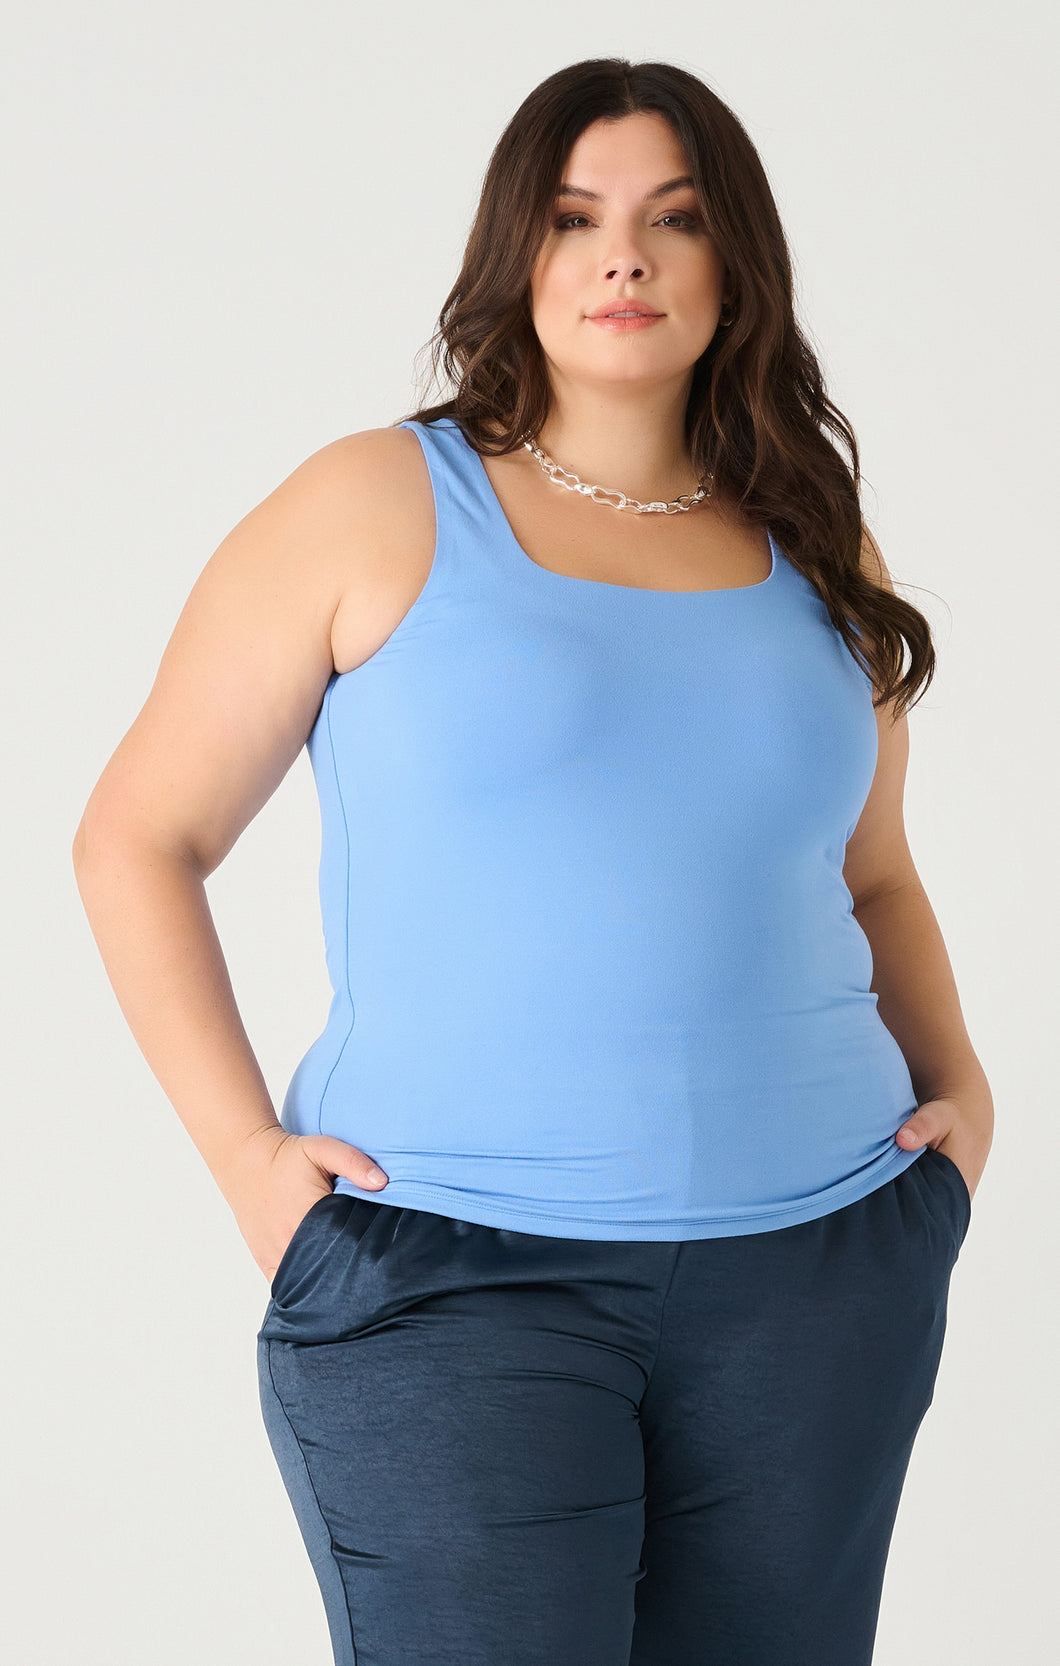 SQUARE NECK OCEAN BLUE TANK by Dex (available in plus sizes)